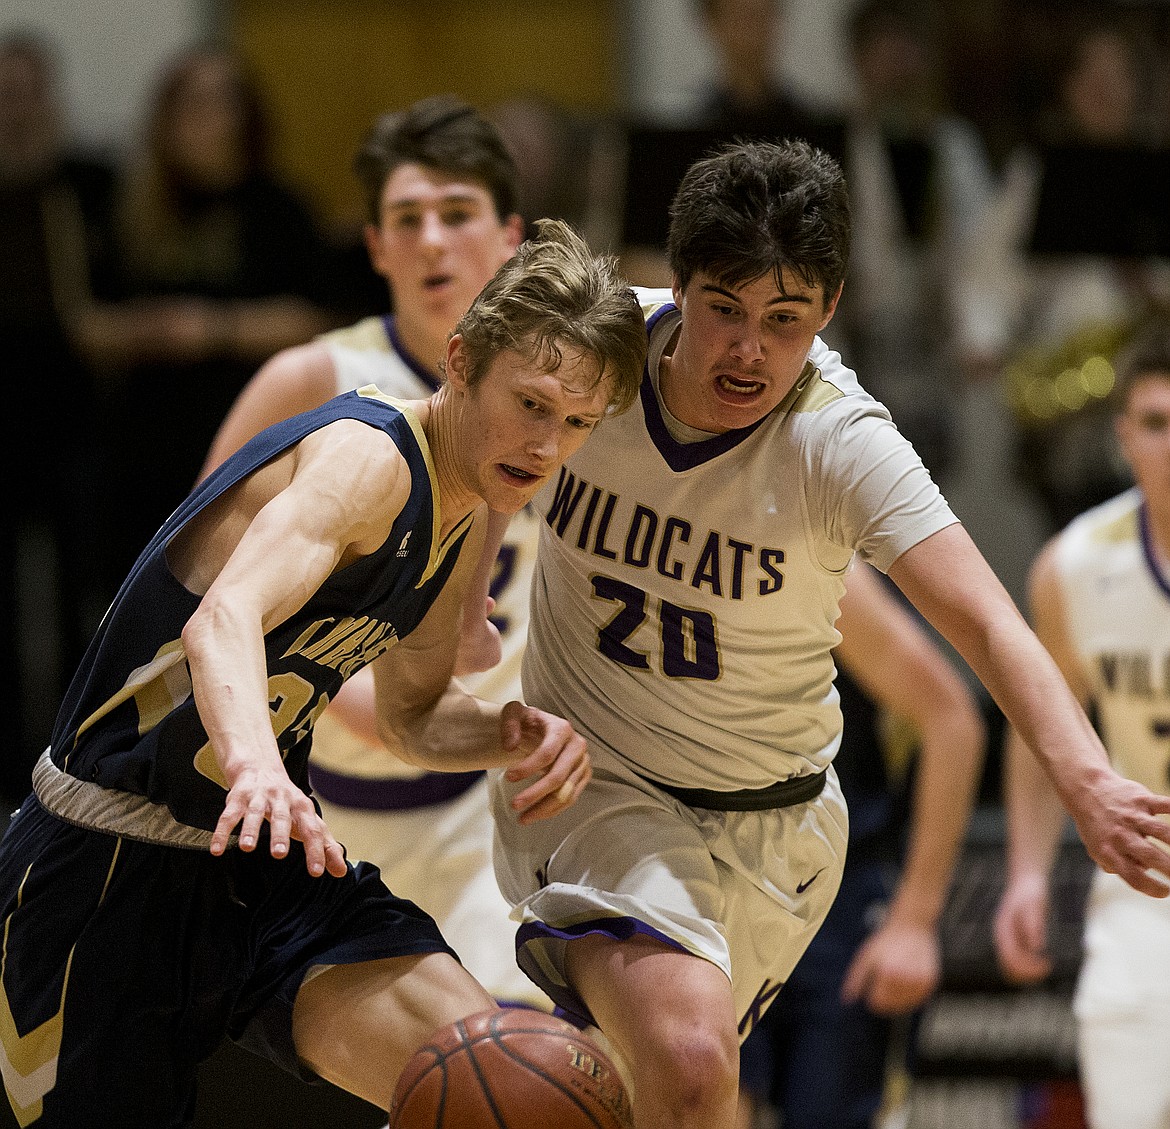 Chase Gardom of Timberlake, left,  and Trevor Bumgardner battle for a loose ball in the 3A District 1 championship game Wednesday night at North Idaho College. (LOREN BENOIT/Press)